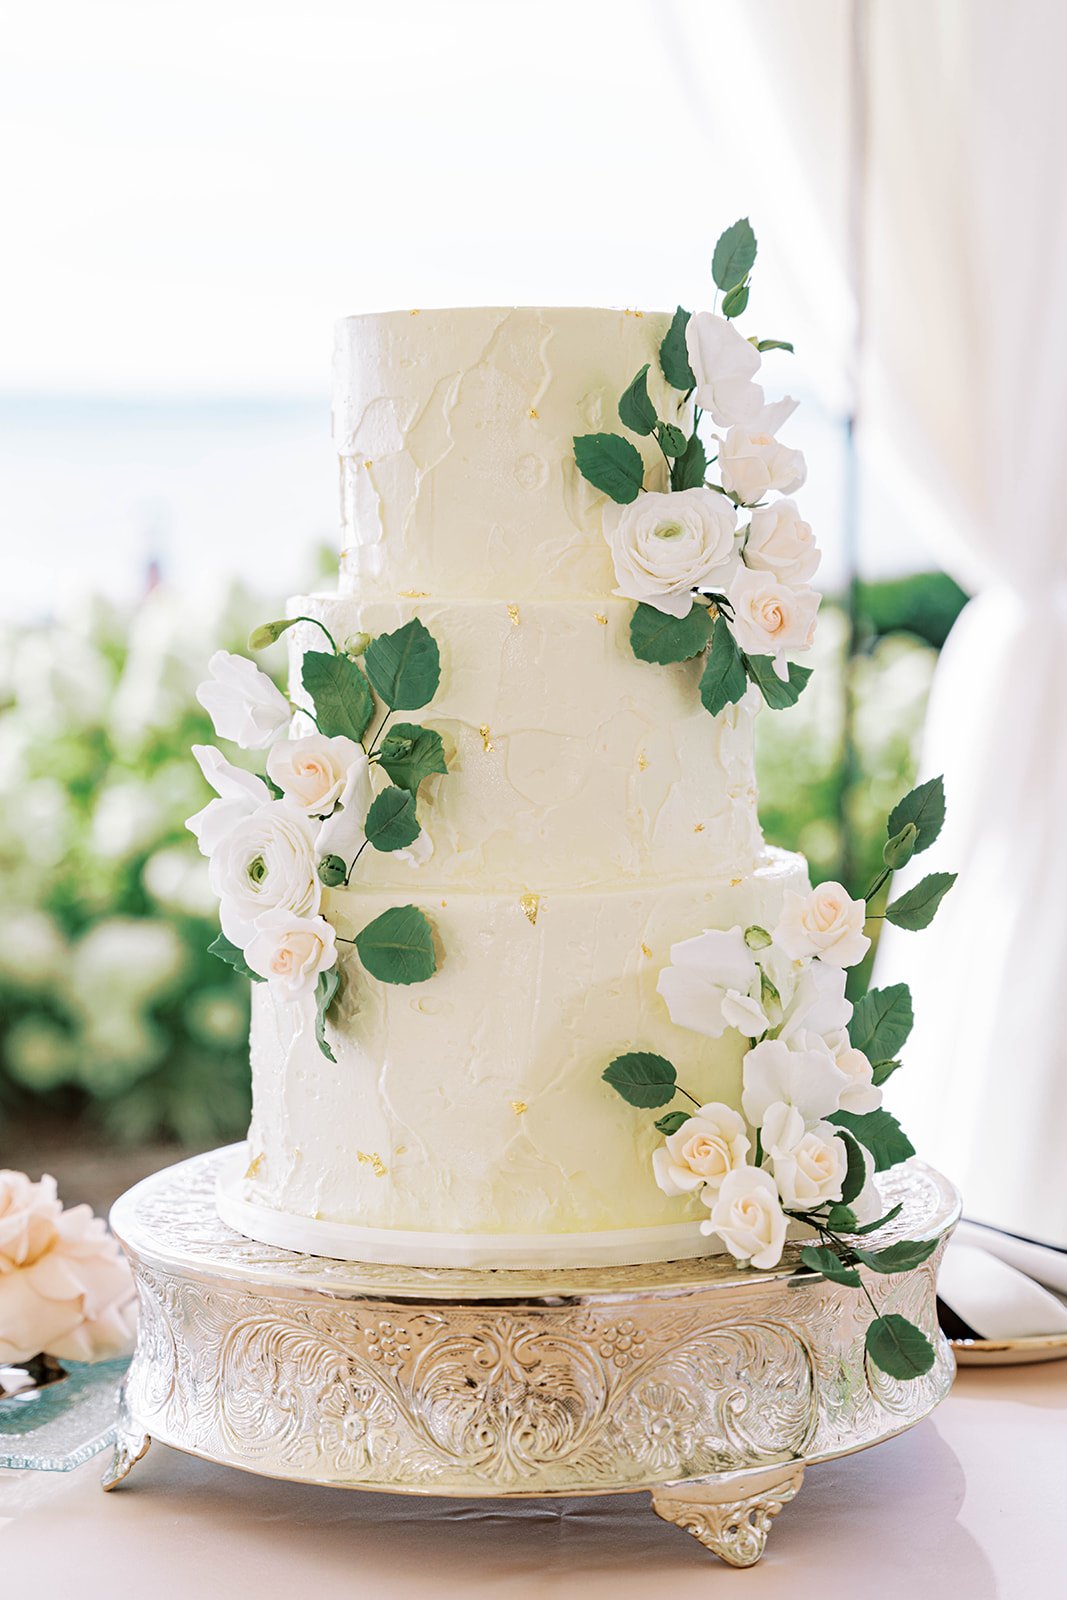 Classic Stucco Wedding Cake with White and Green Sugar Flowers at Woodmark Hotel Wedding